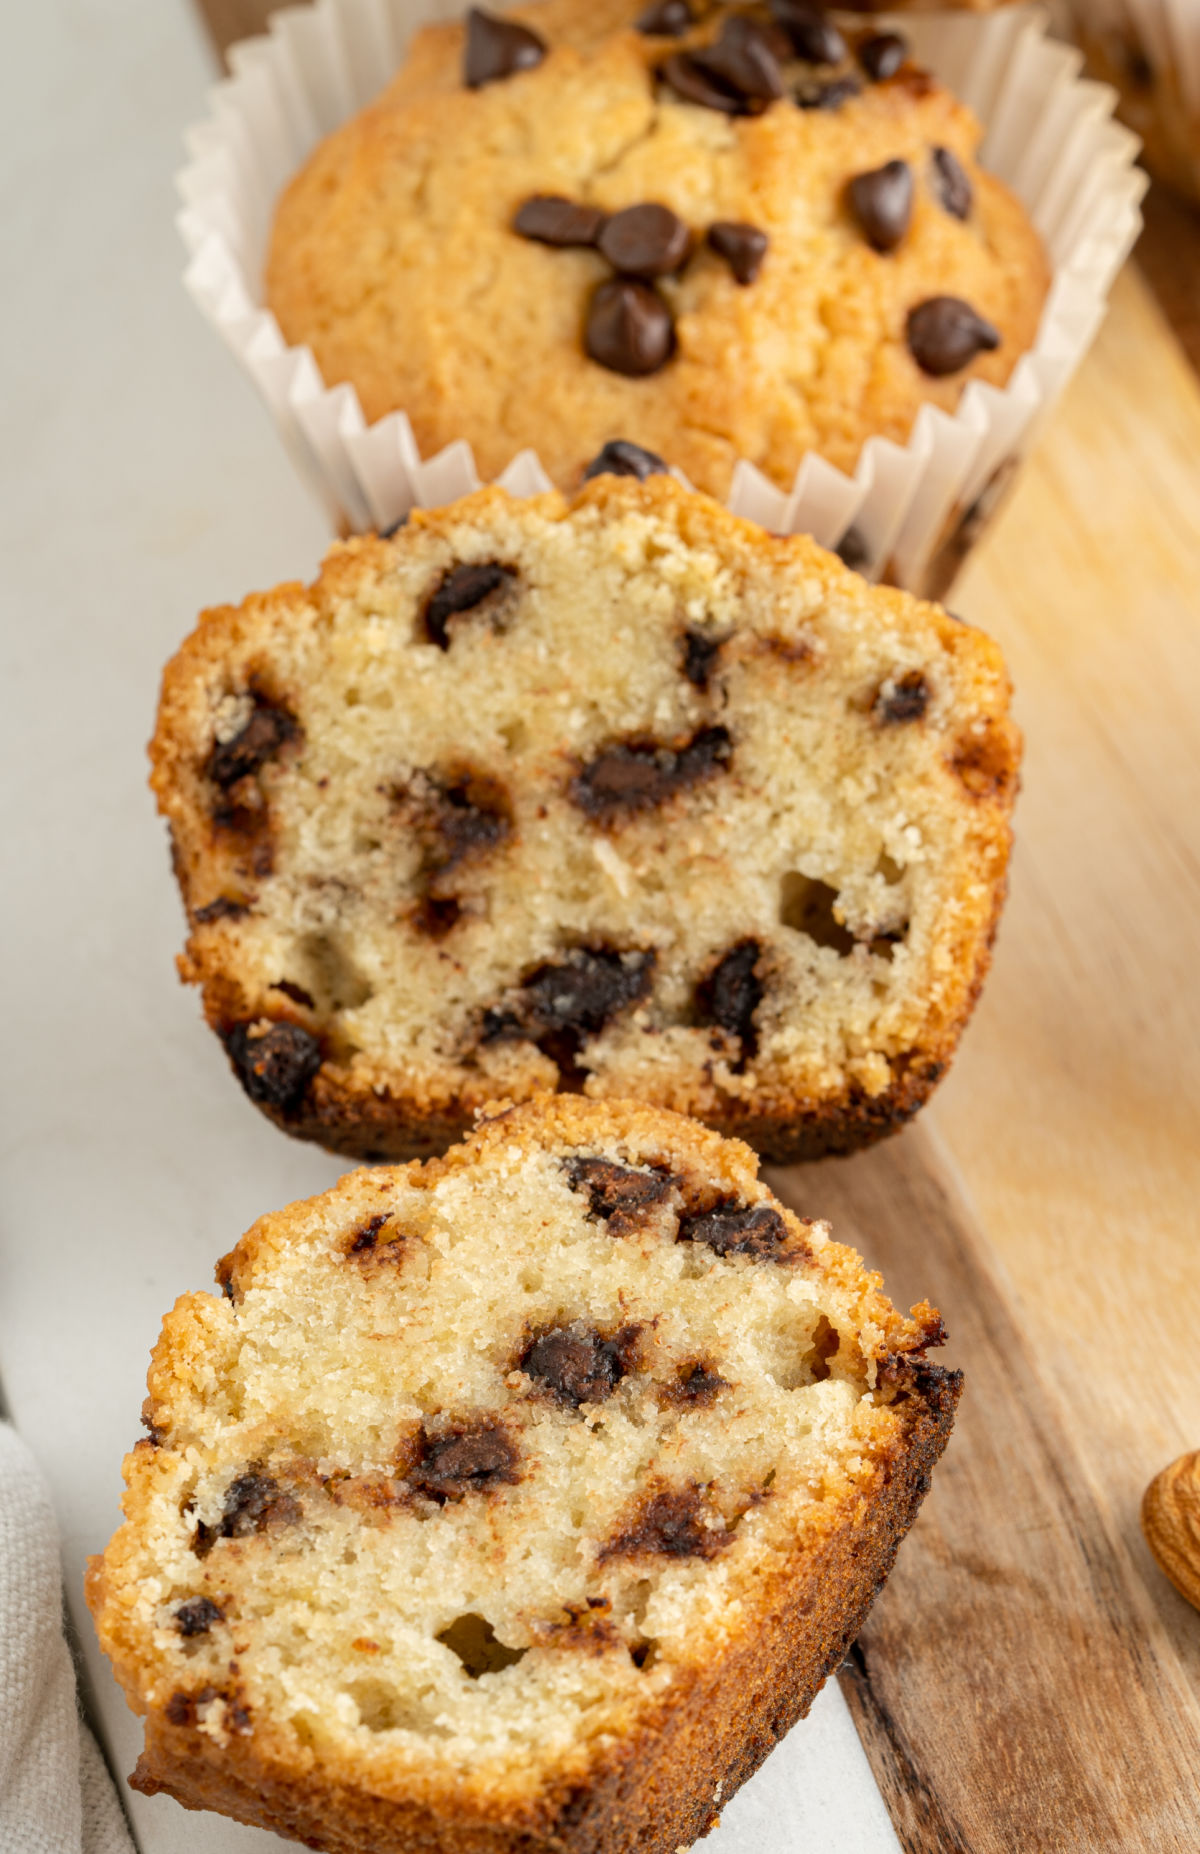 Chocolate chip muffins sliced in half.